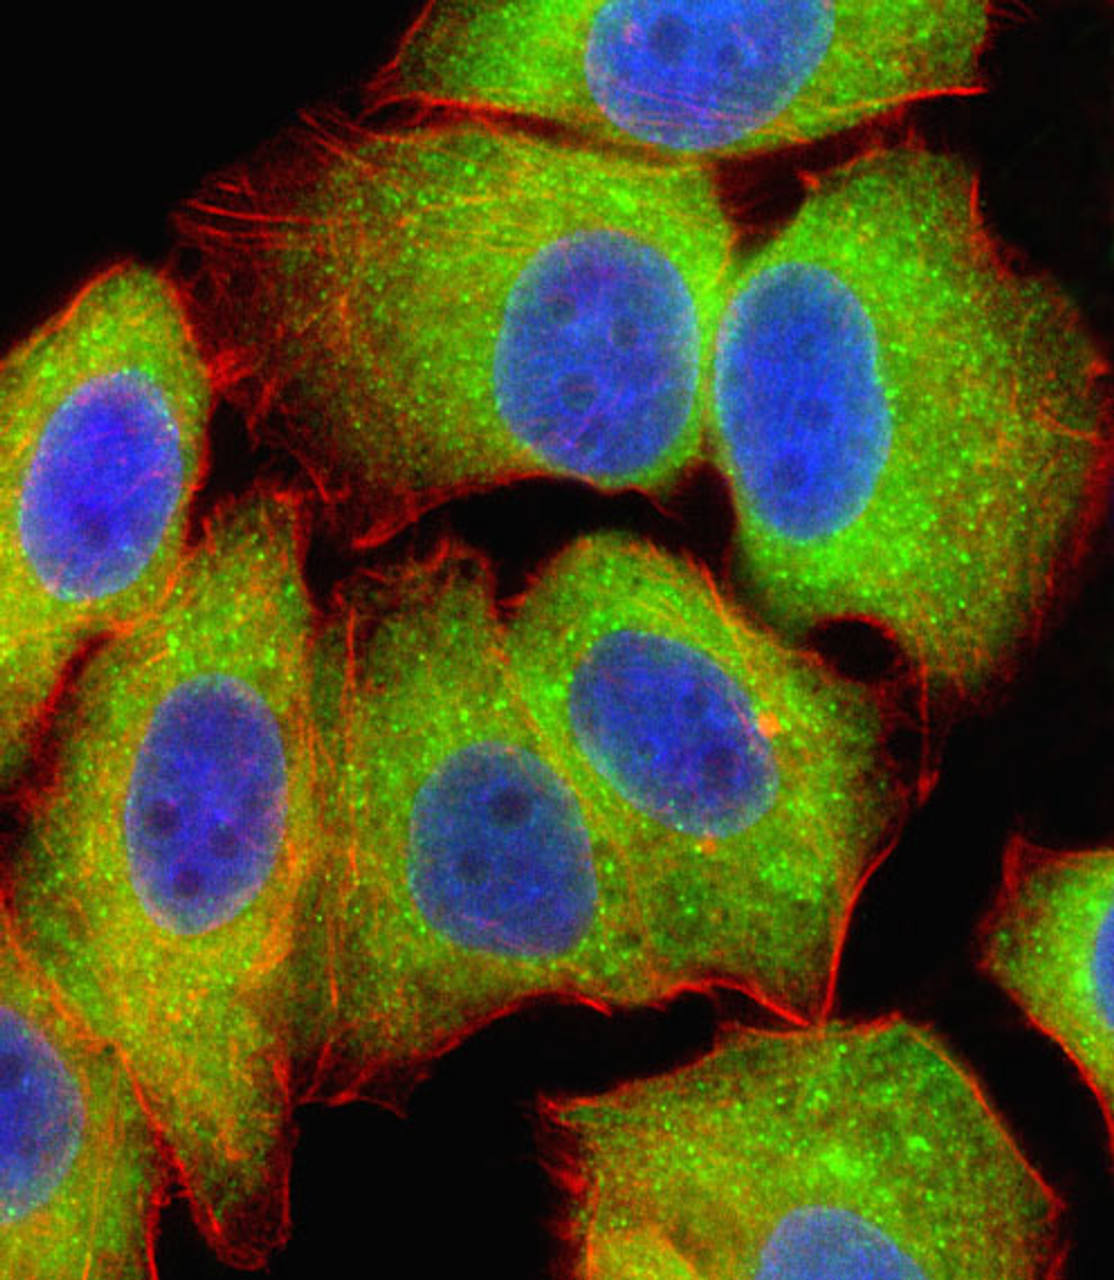 Fluorescent confocal image of U251 cell stained with RELA Antibody .U251 cells were fixed with 4% PFA (20 min) , permeabilized with Triton X-100 (0.1%, 10 min) , then incubated with RELA primary antibody (1:25) . For secondary antibody, Alexa Fluor 488 conjugated donkey anti-rabbit antibody (green) was used (1:400) .Cytoplasmic actin was counterstained with Alexa Fluor 555 (red) conjugated Phalloidin (7units/ml) . Nuclei were counterstained with DAPI (blue) (10 ug/ml, 10 min) .RELA immunoreactivity is localized to Cytoplasm significantly.